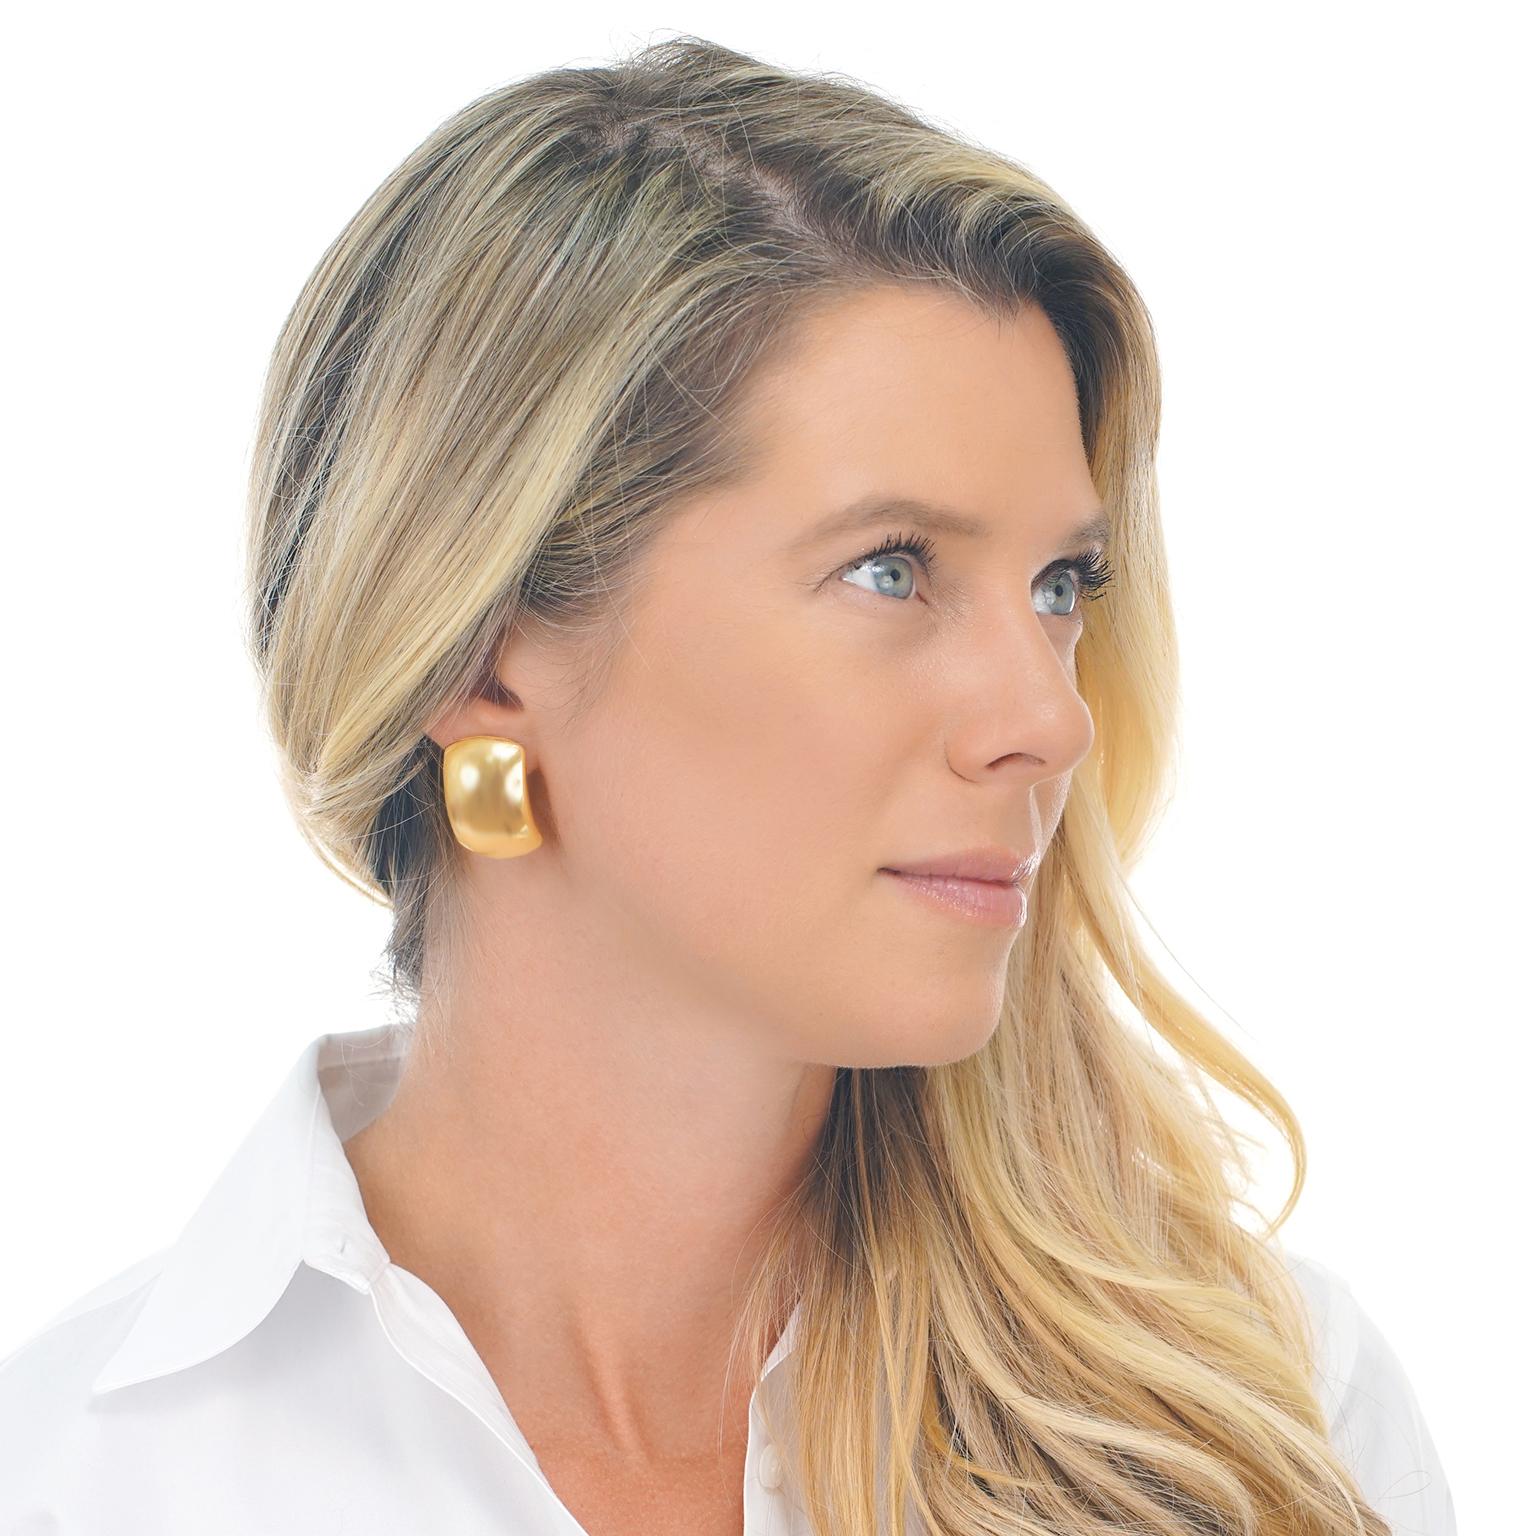 Circa 2000s, 18k, by Bucherer, Switzerland.   These yellow gold earrings effortlessly go with everything. Especially glamorous with casual fashion, they are beautifully designed and finely fashioned. Pieces from Bucherer are passionately Swiss